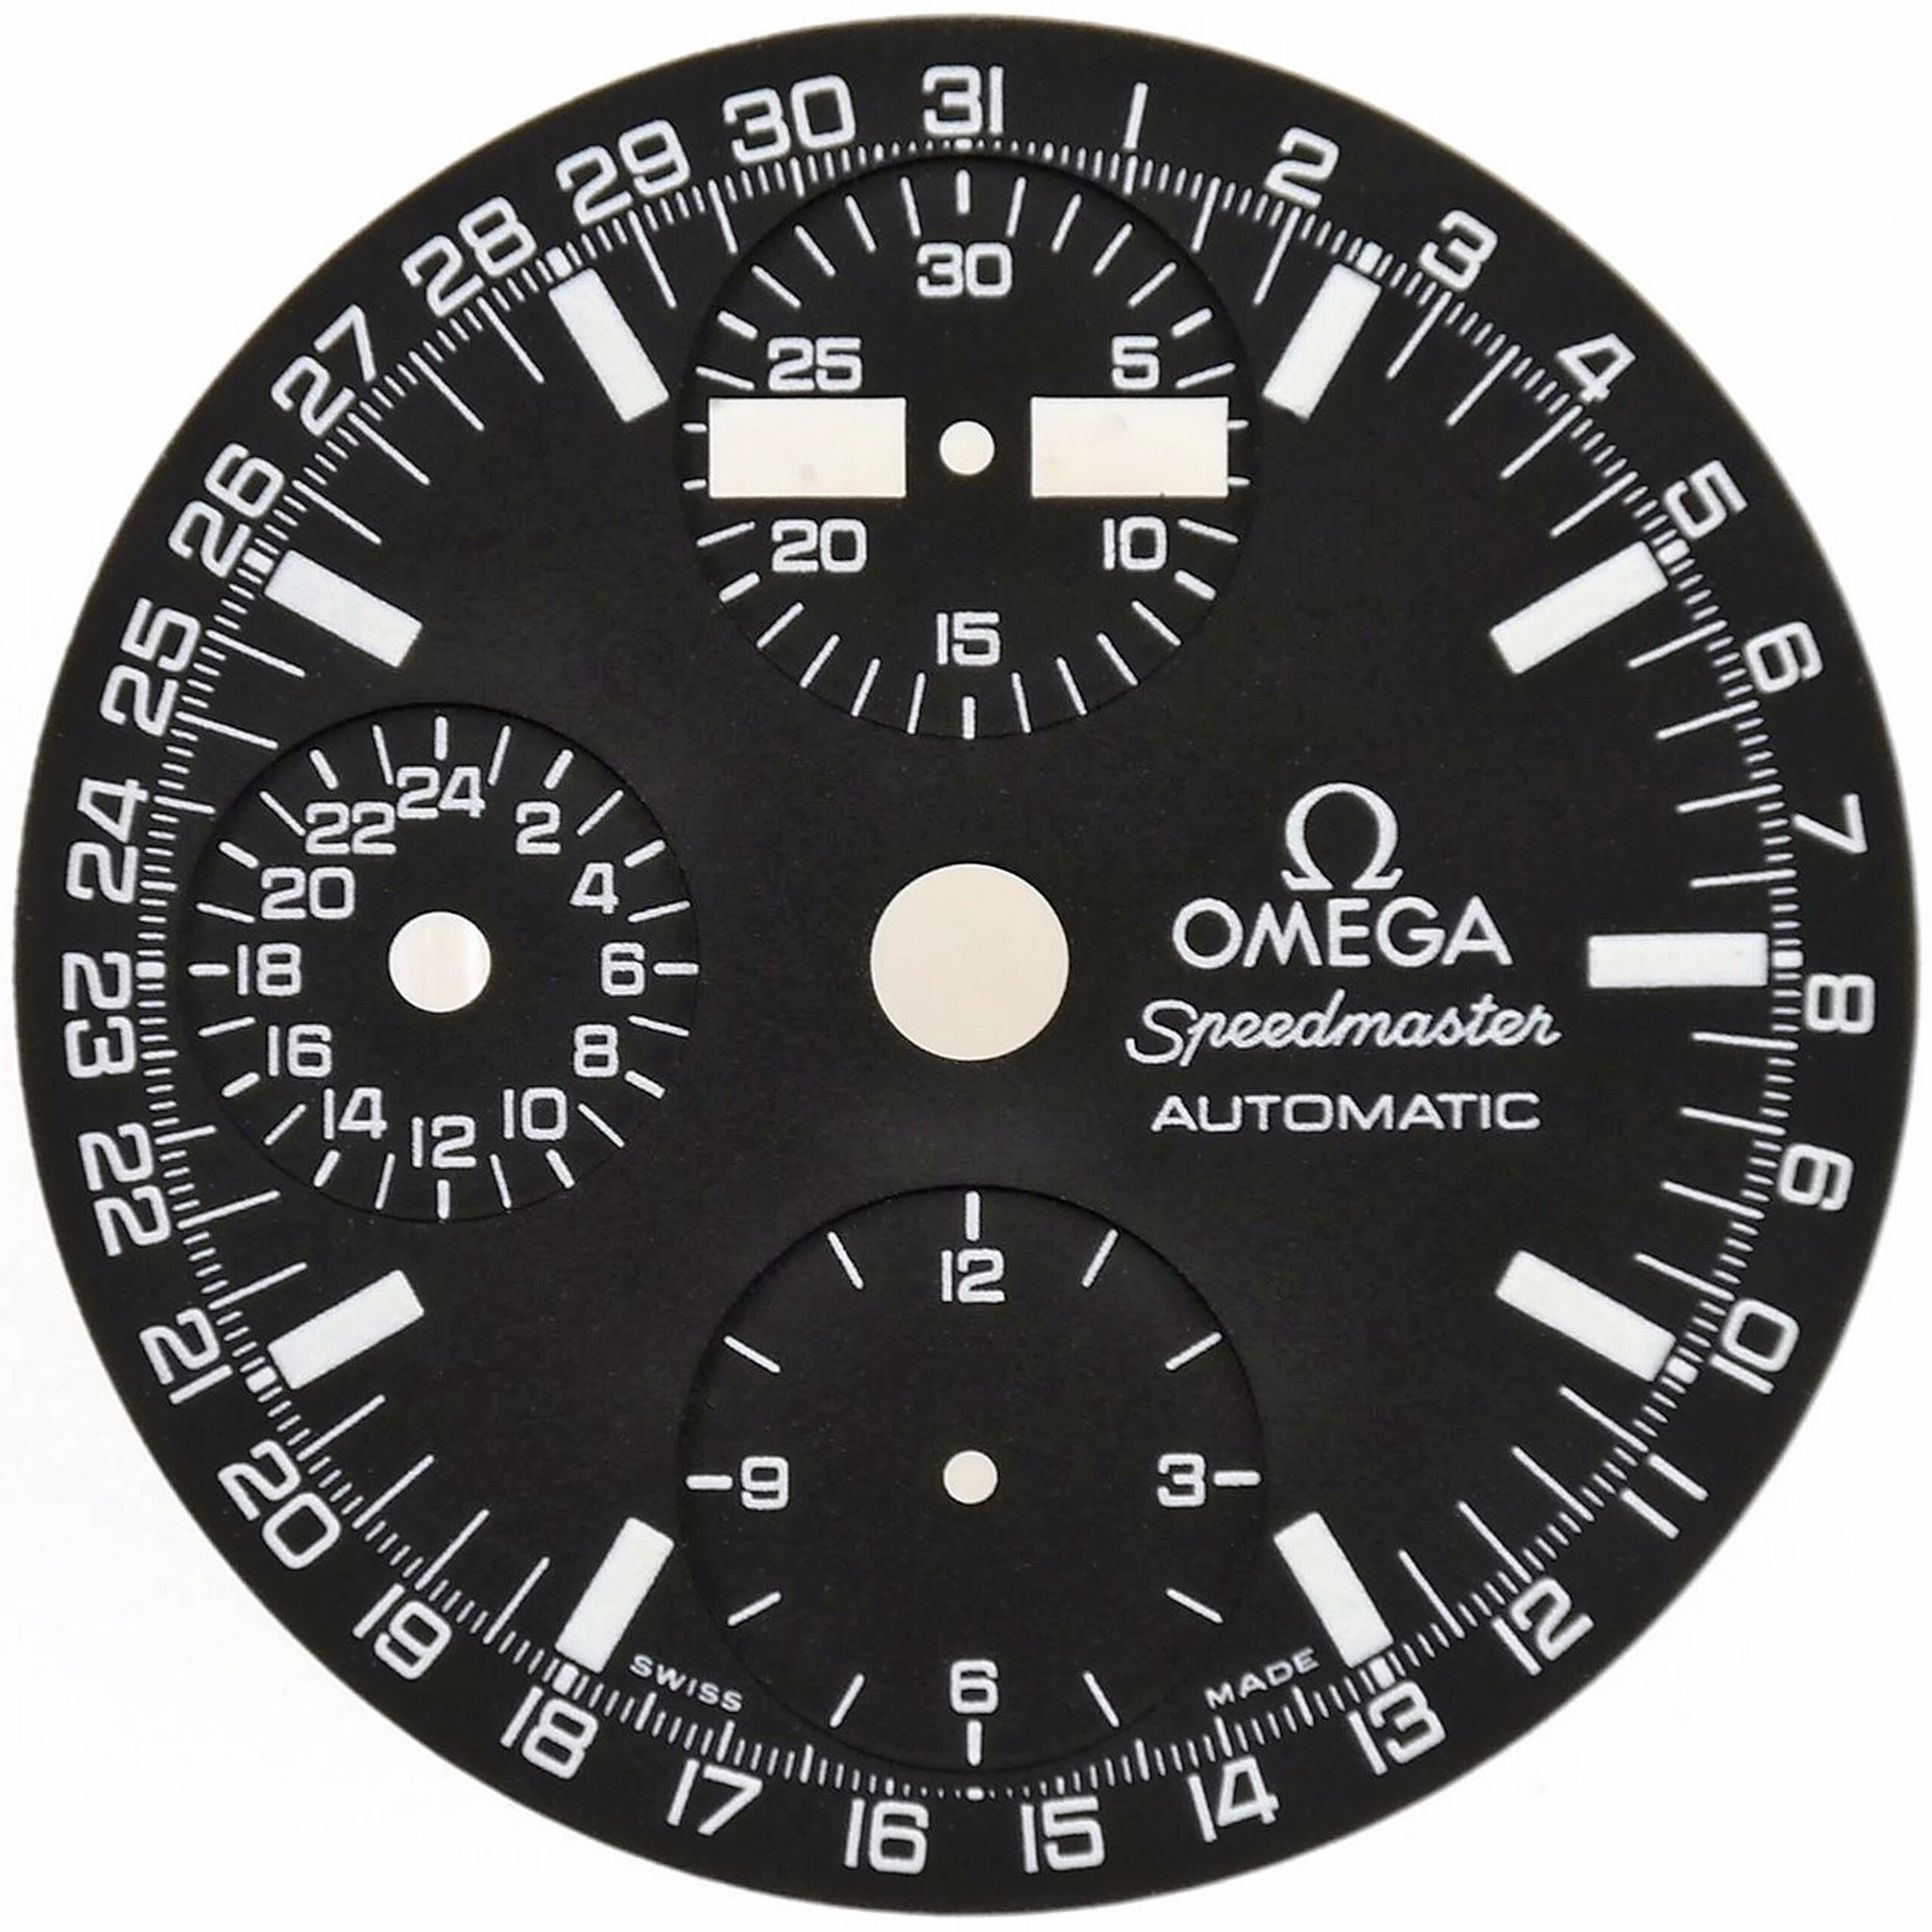 OMEGA - Speedmaster 3520 Cal. 1151 - Automatic Chronograph Watch Dial - Black